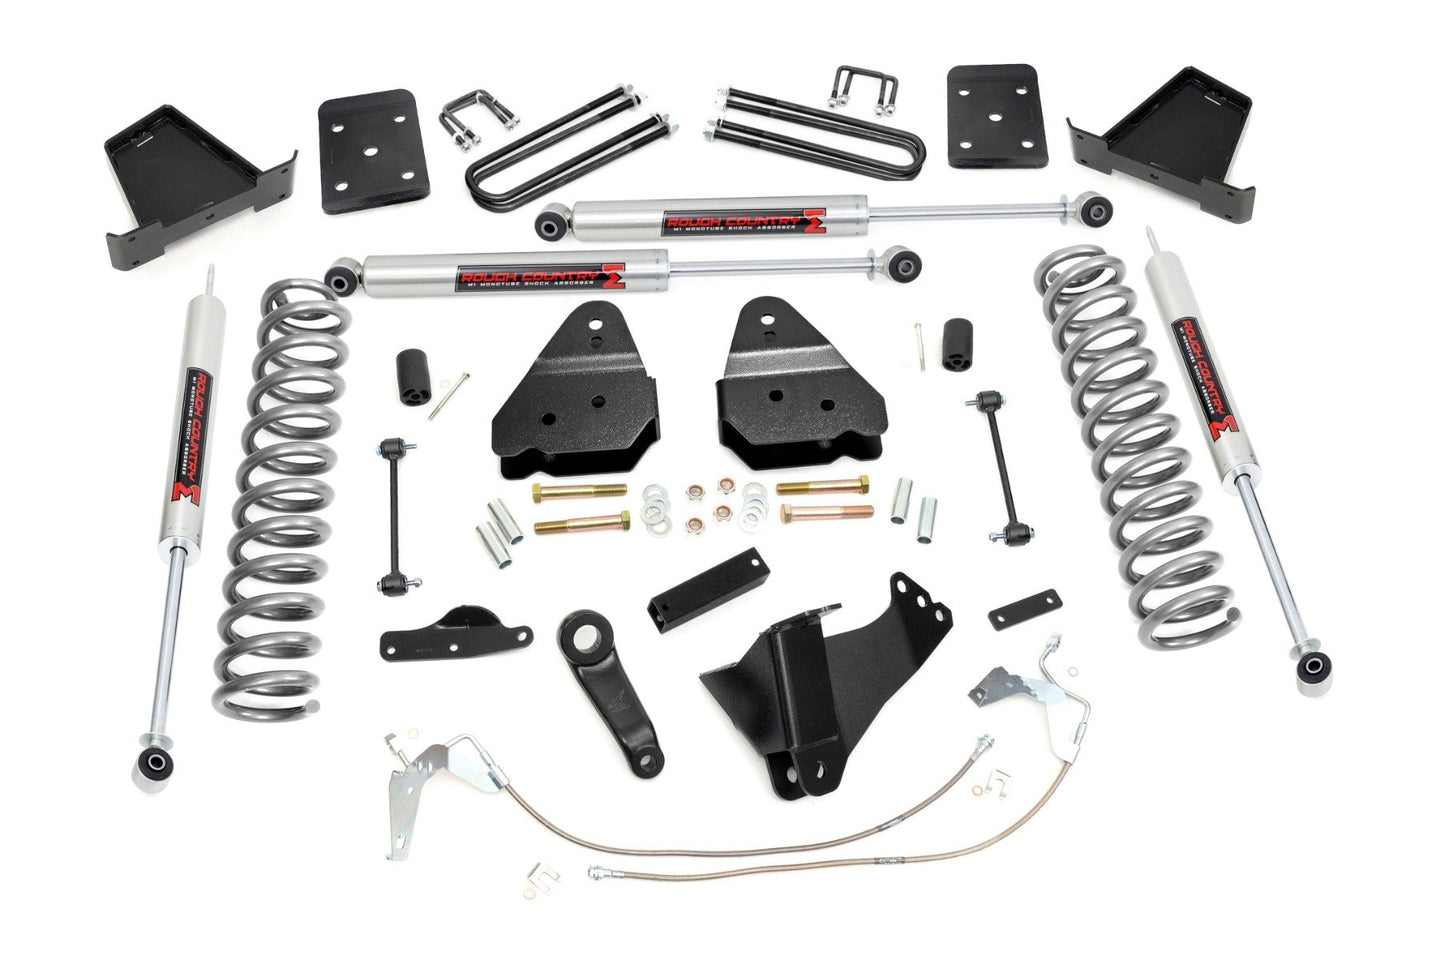 Rough Country 4.5 Inch Lift Kit | W/O Overloads | M1 | Ford F-250/F-350 Super Duty (08-10)